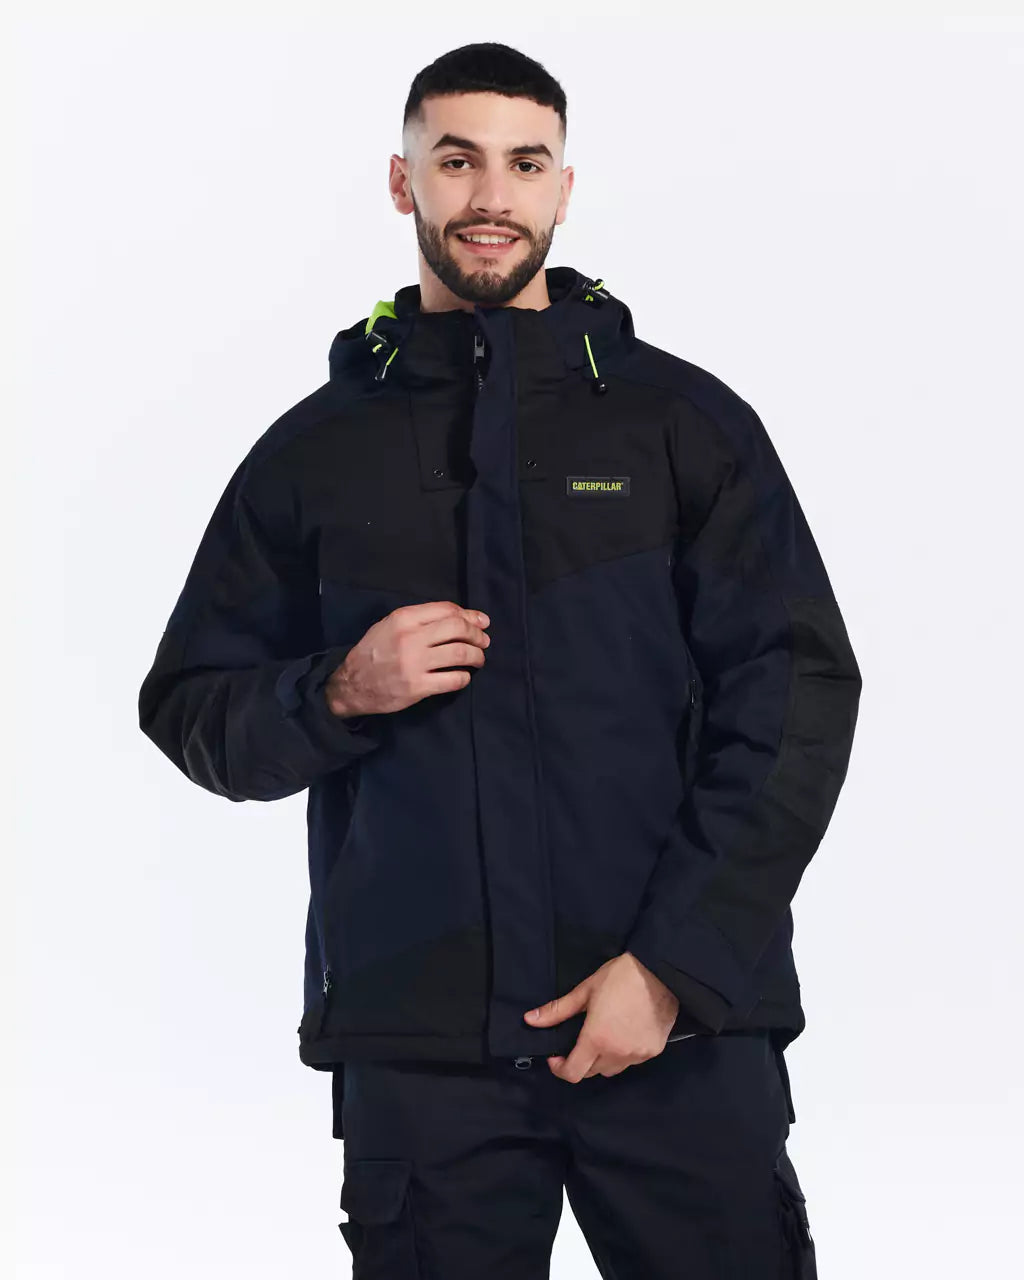 CAT Men's Insulated Utility Jacket